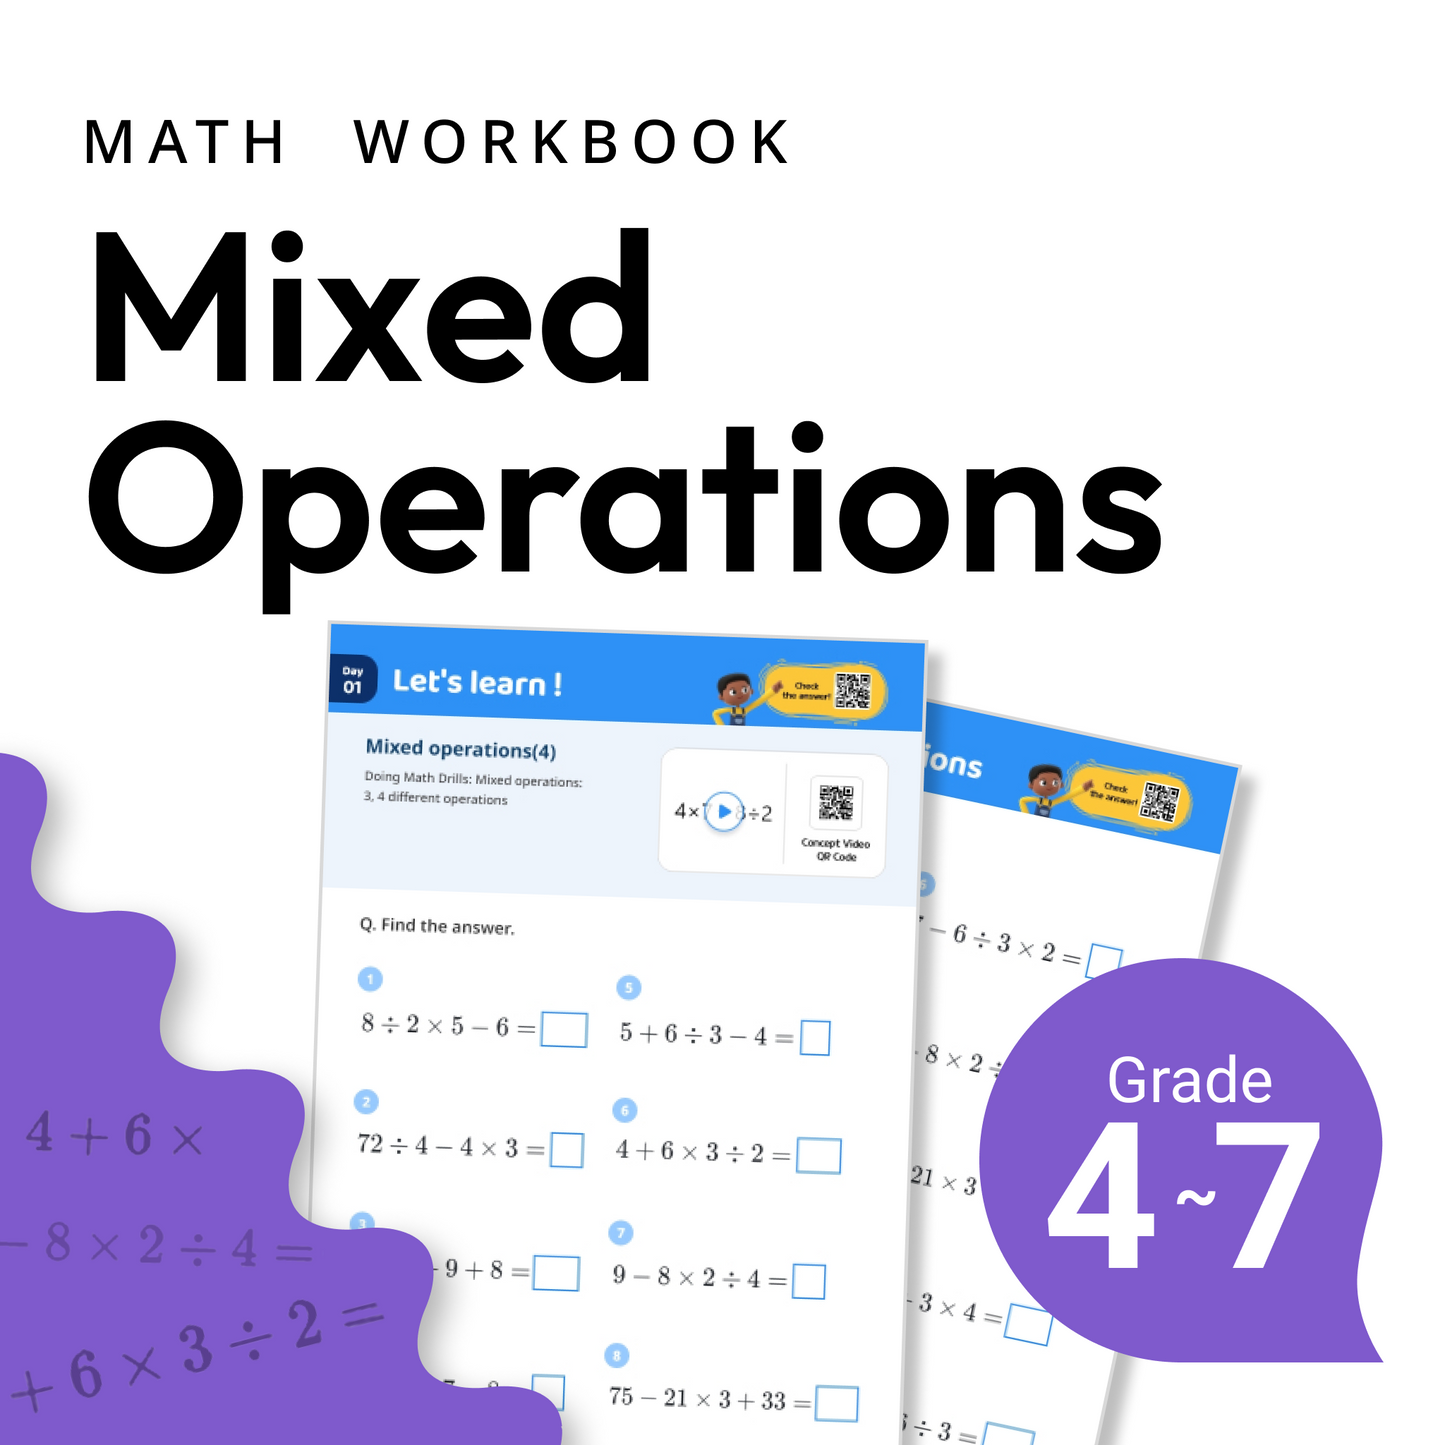 Mixed_operations-_3-_4_different_operations